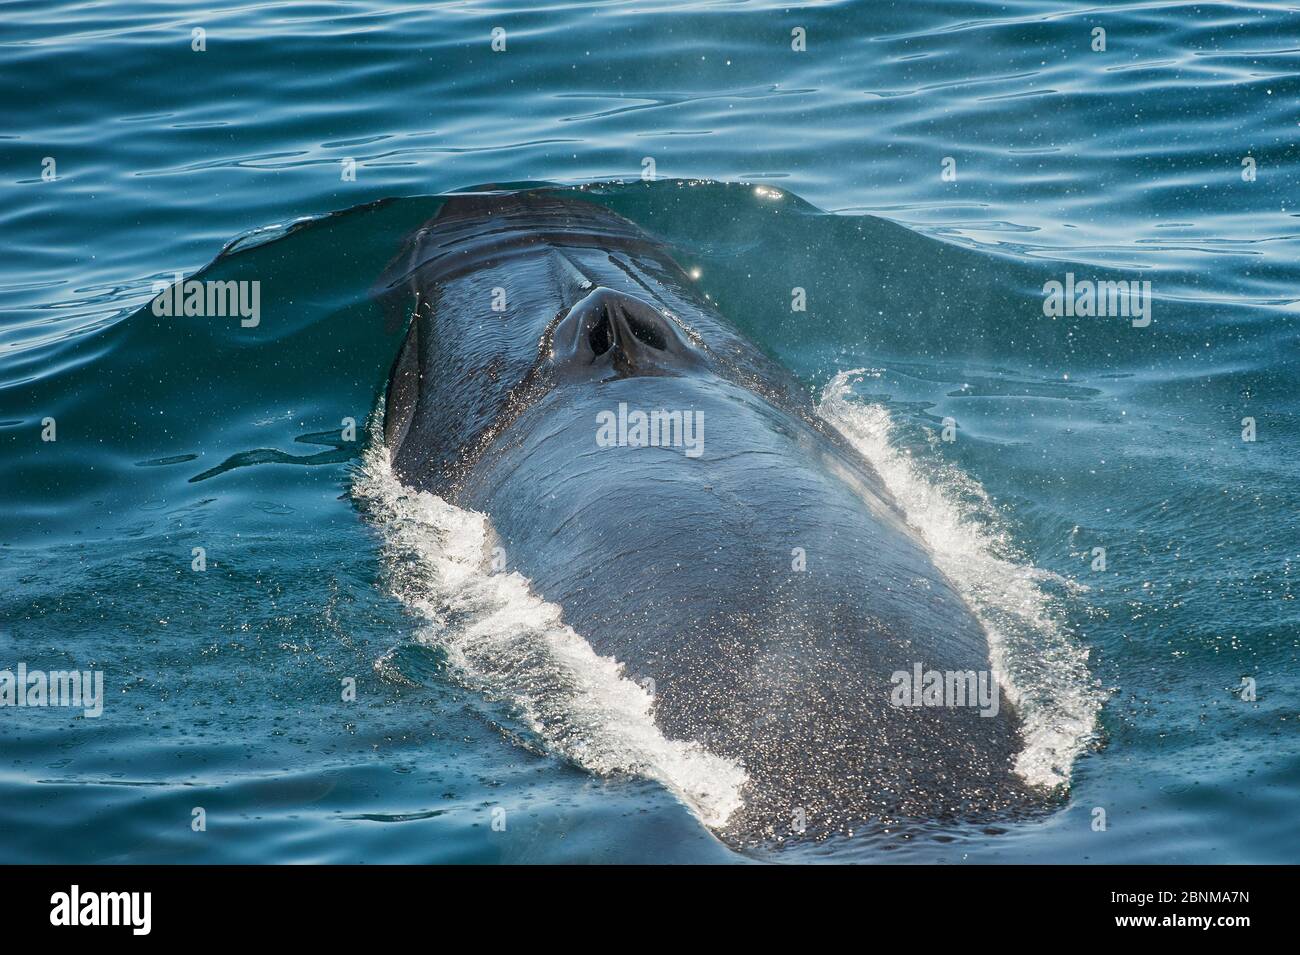 Bryde's / Tropical whale (Balaenoptera edeni) surfacing showing blow hole, Sea of Cortez, Gulf of California, Baja California, Mexico, October Stock Photo